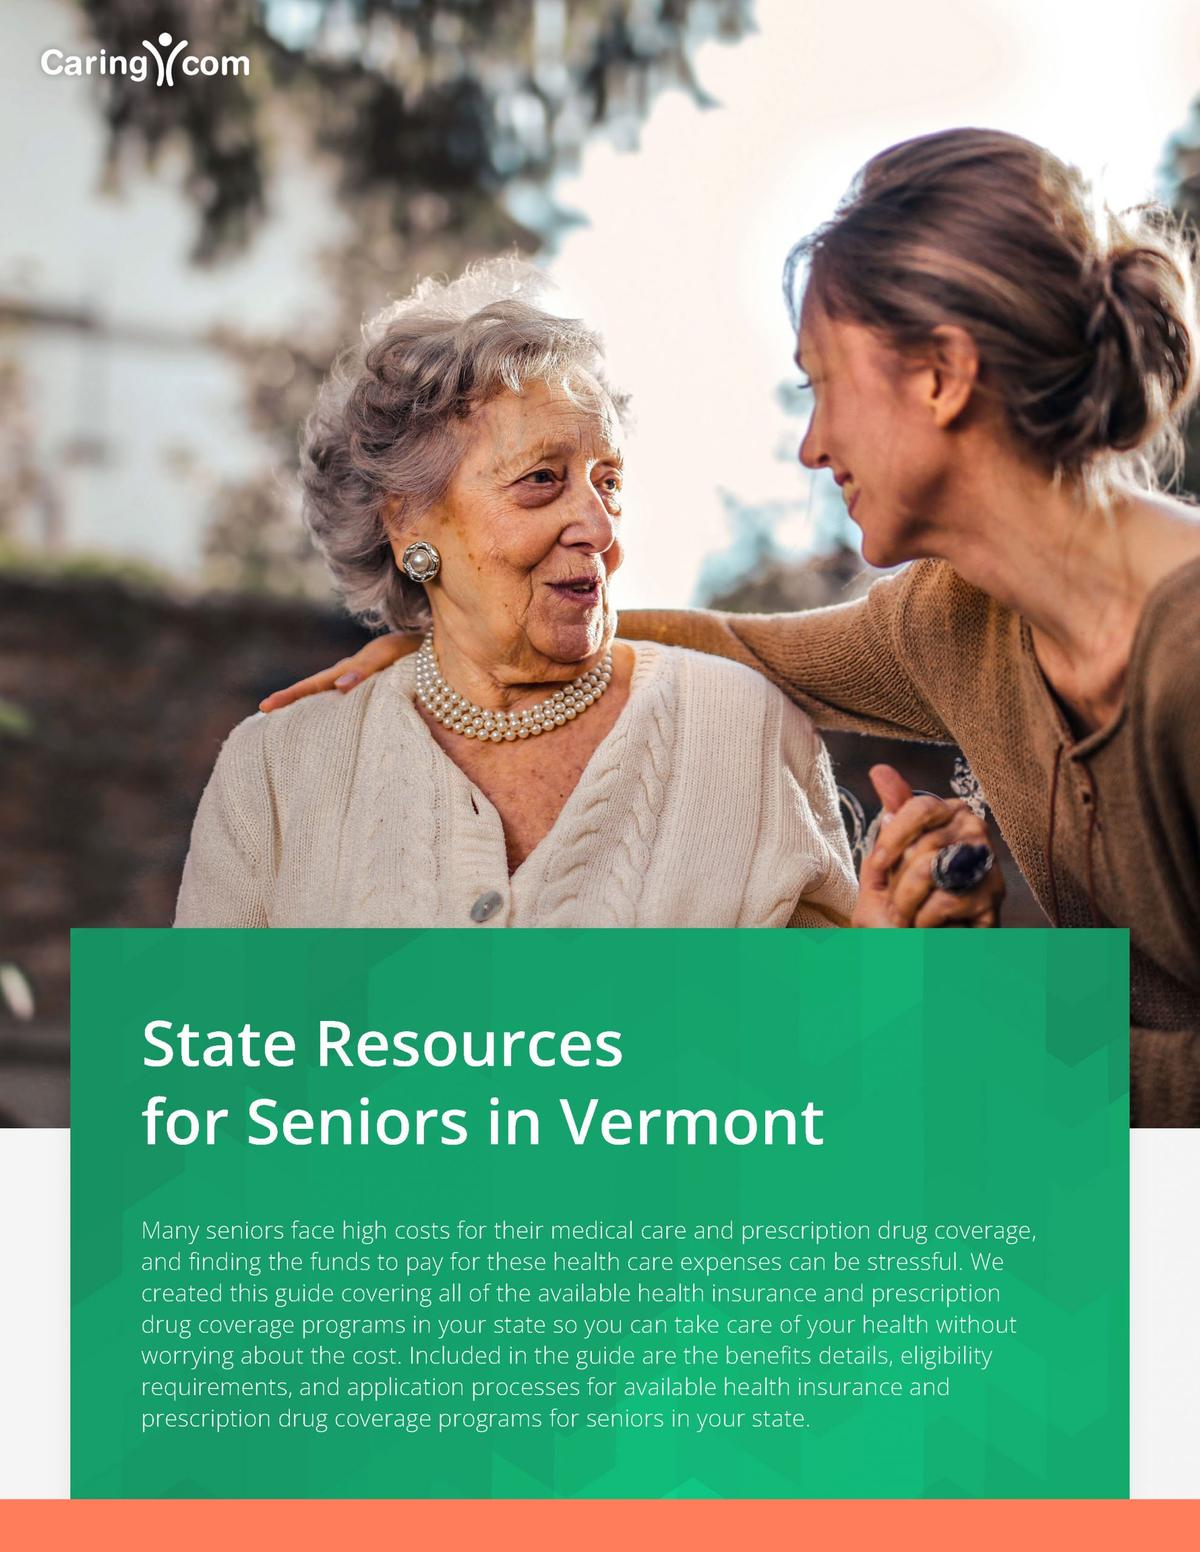 Financial Assistance for Prescriptions in Vermont